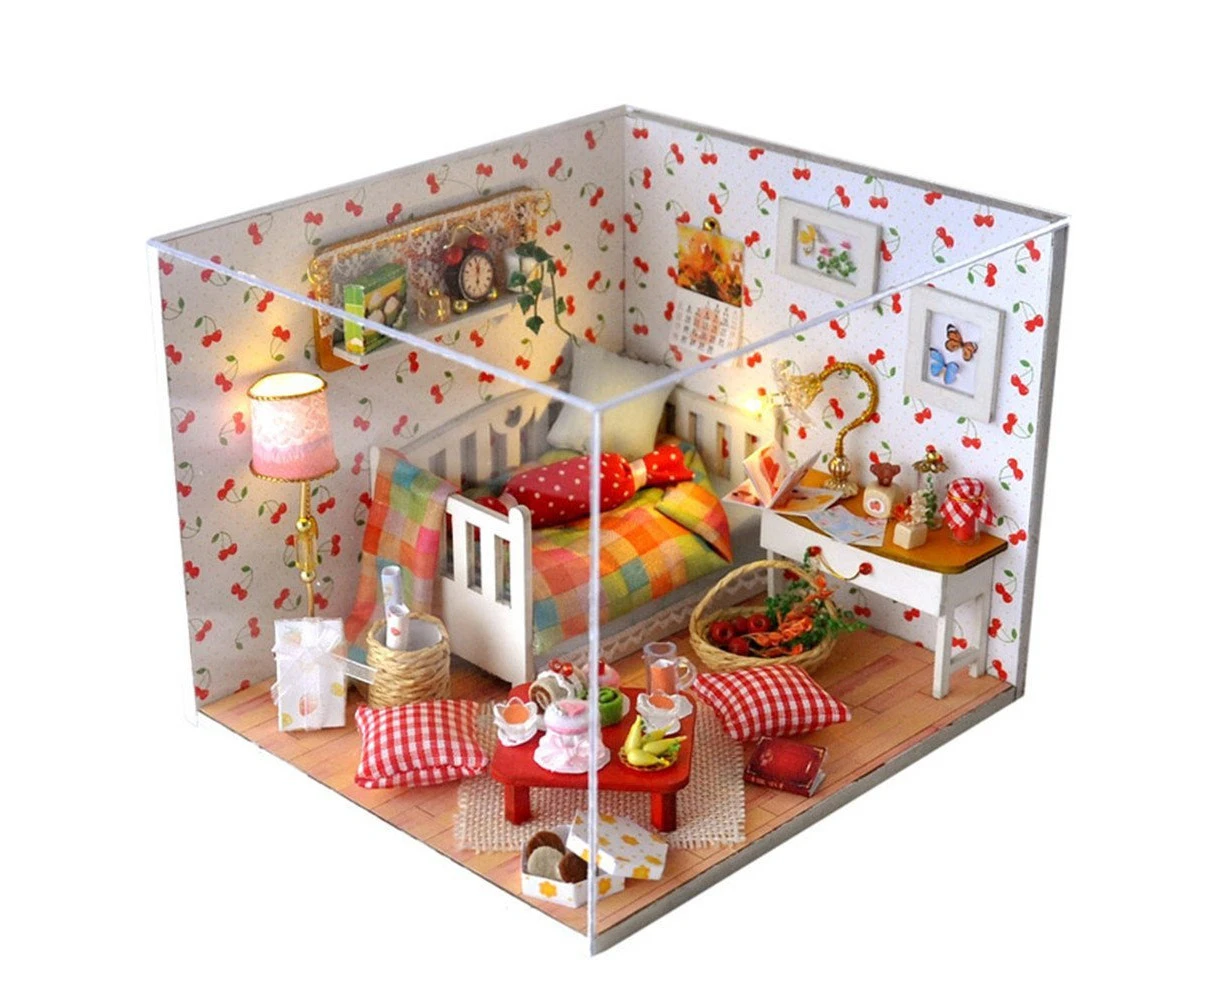  CUTEBEE Dollhouse Miniature with Furniture, DIY Dollhouse Kit  Plus Dust Proof and Music Movement, 1:24 Scale Creative Room for  Valentine's Day Gift Idea (Rose Garden Tea House) : Toys & Games